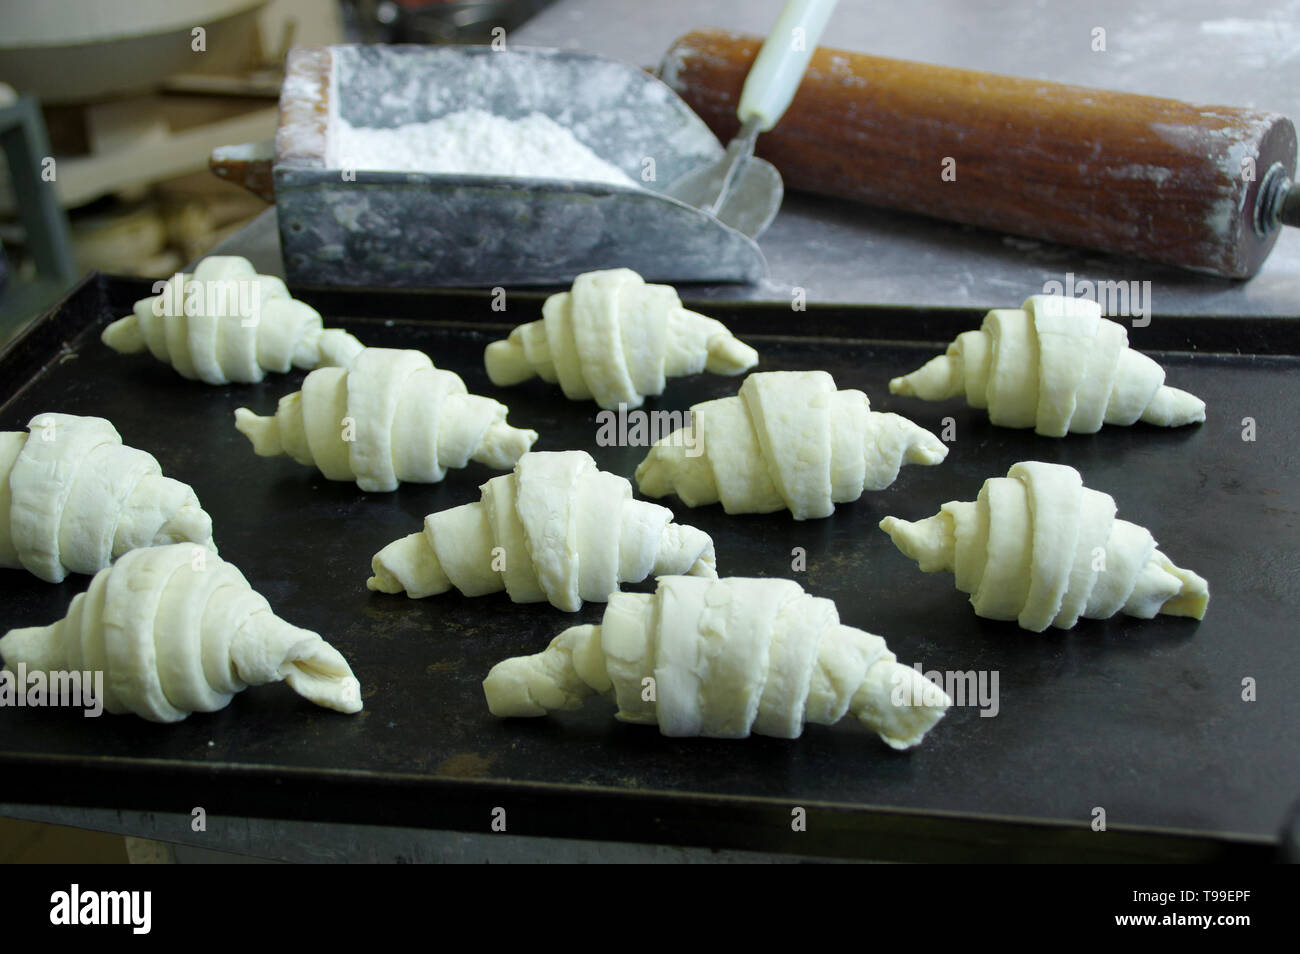 Raw croissants arranged on a baking sheet. Preparation of baking dough in a pastry shop. Flour and roller in the background. Stock Photo